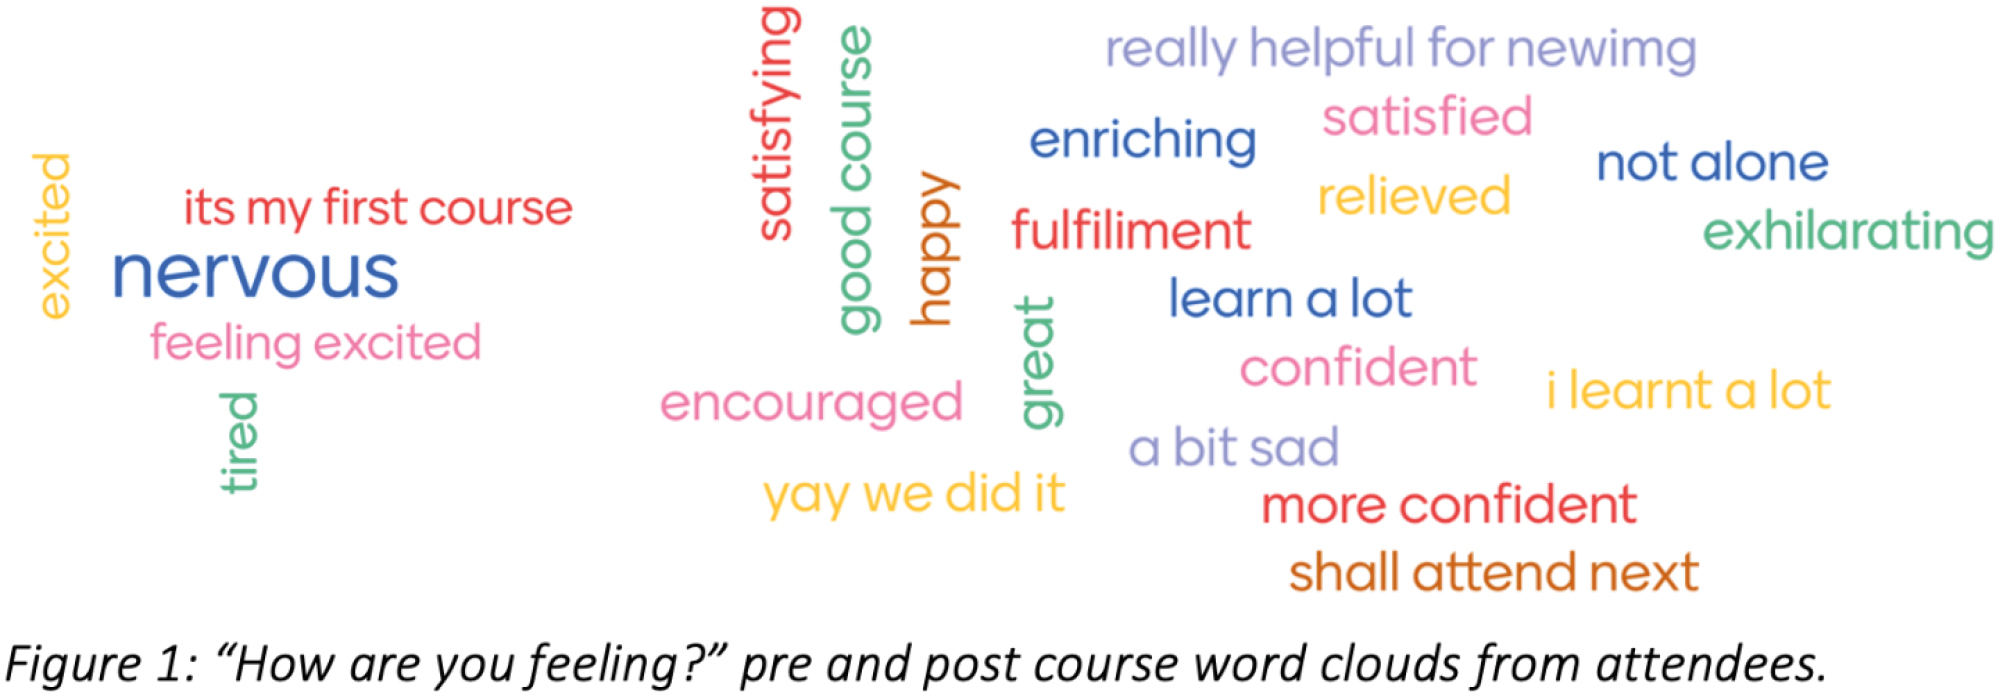 ‘How are you feeling?’ pre- and post-course clouds from attendees.